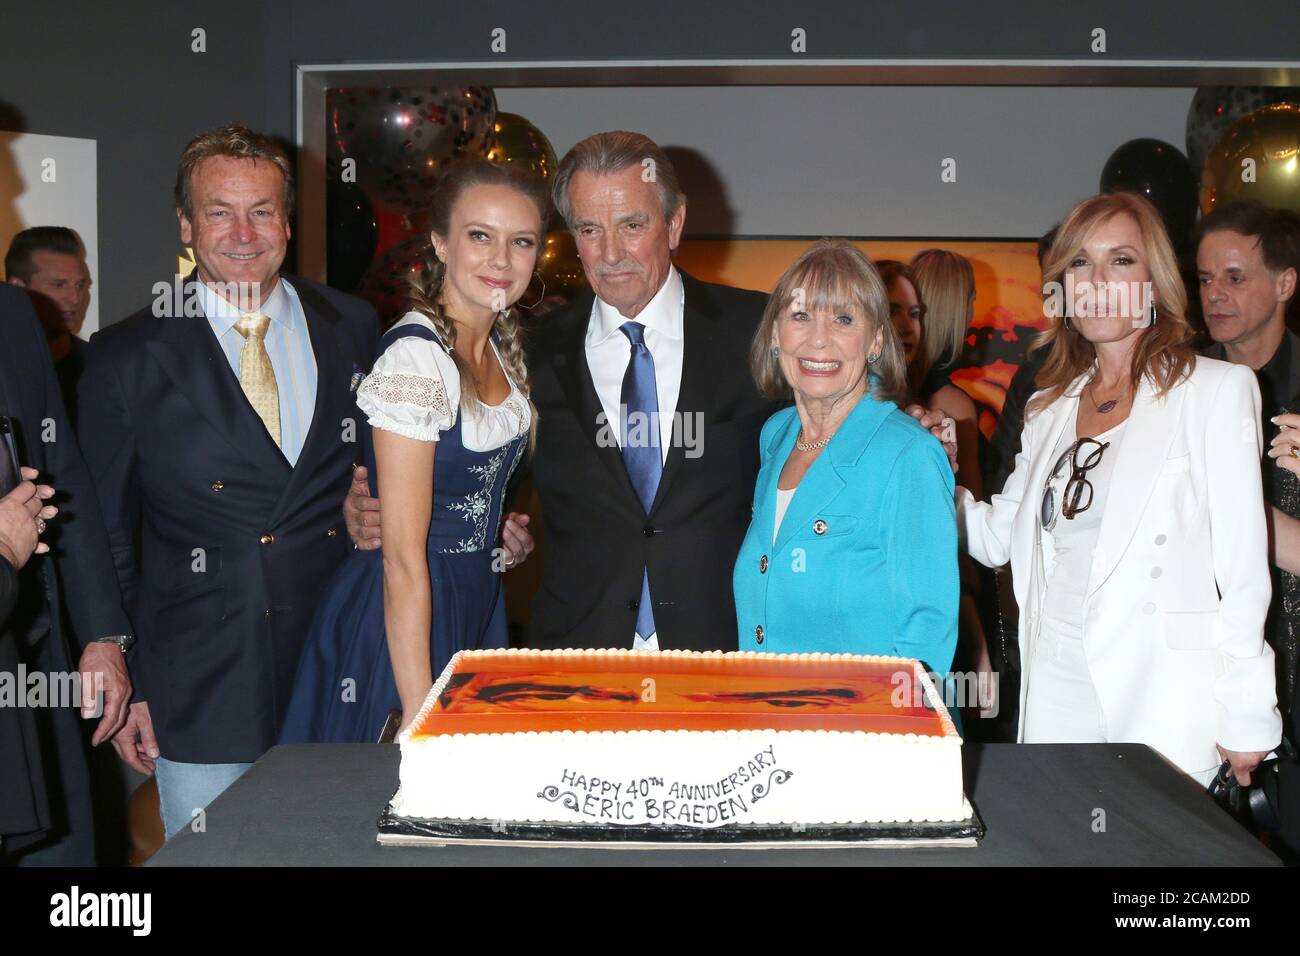 LOS ANGELES - FEB 7:  Doug Davidson, Melissa Ordway, Eric Braeden, Marla Adams, Tracey Bregman at the Eric Braeden 40th Anniversary Celebration on The Young and The Restless at the Television City on February 7, 2020 in Los Angeles, CA Stock Photo